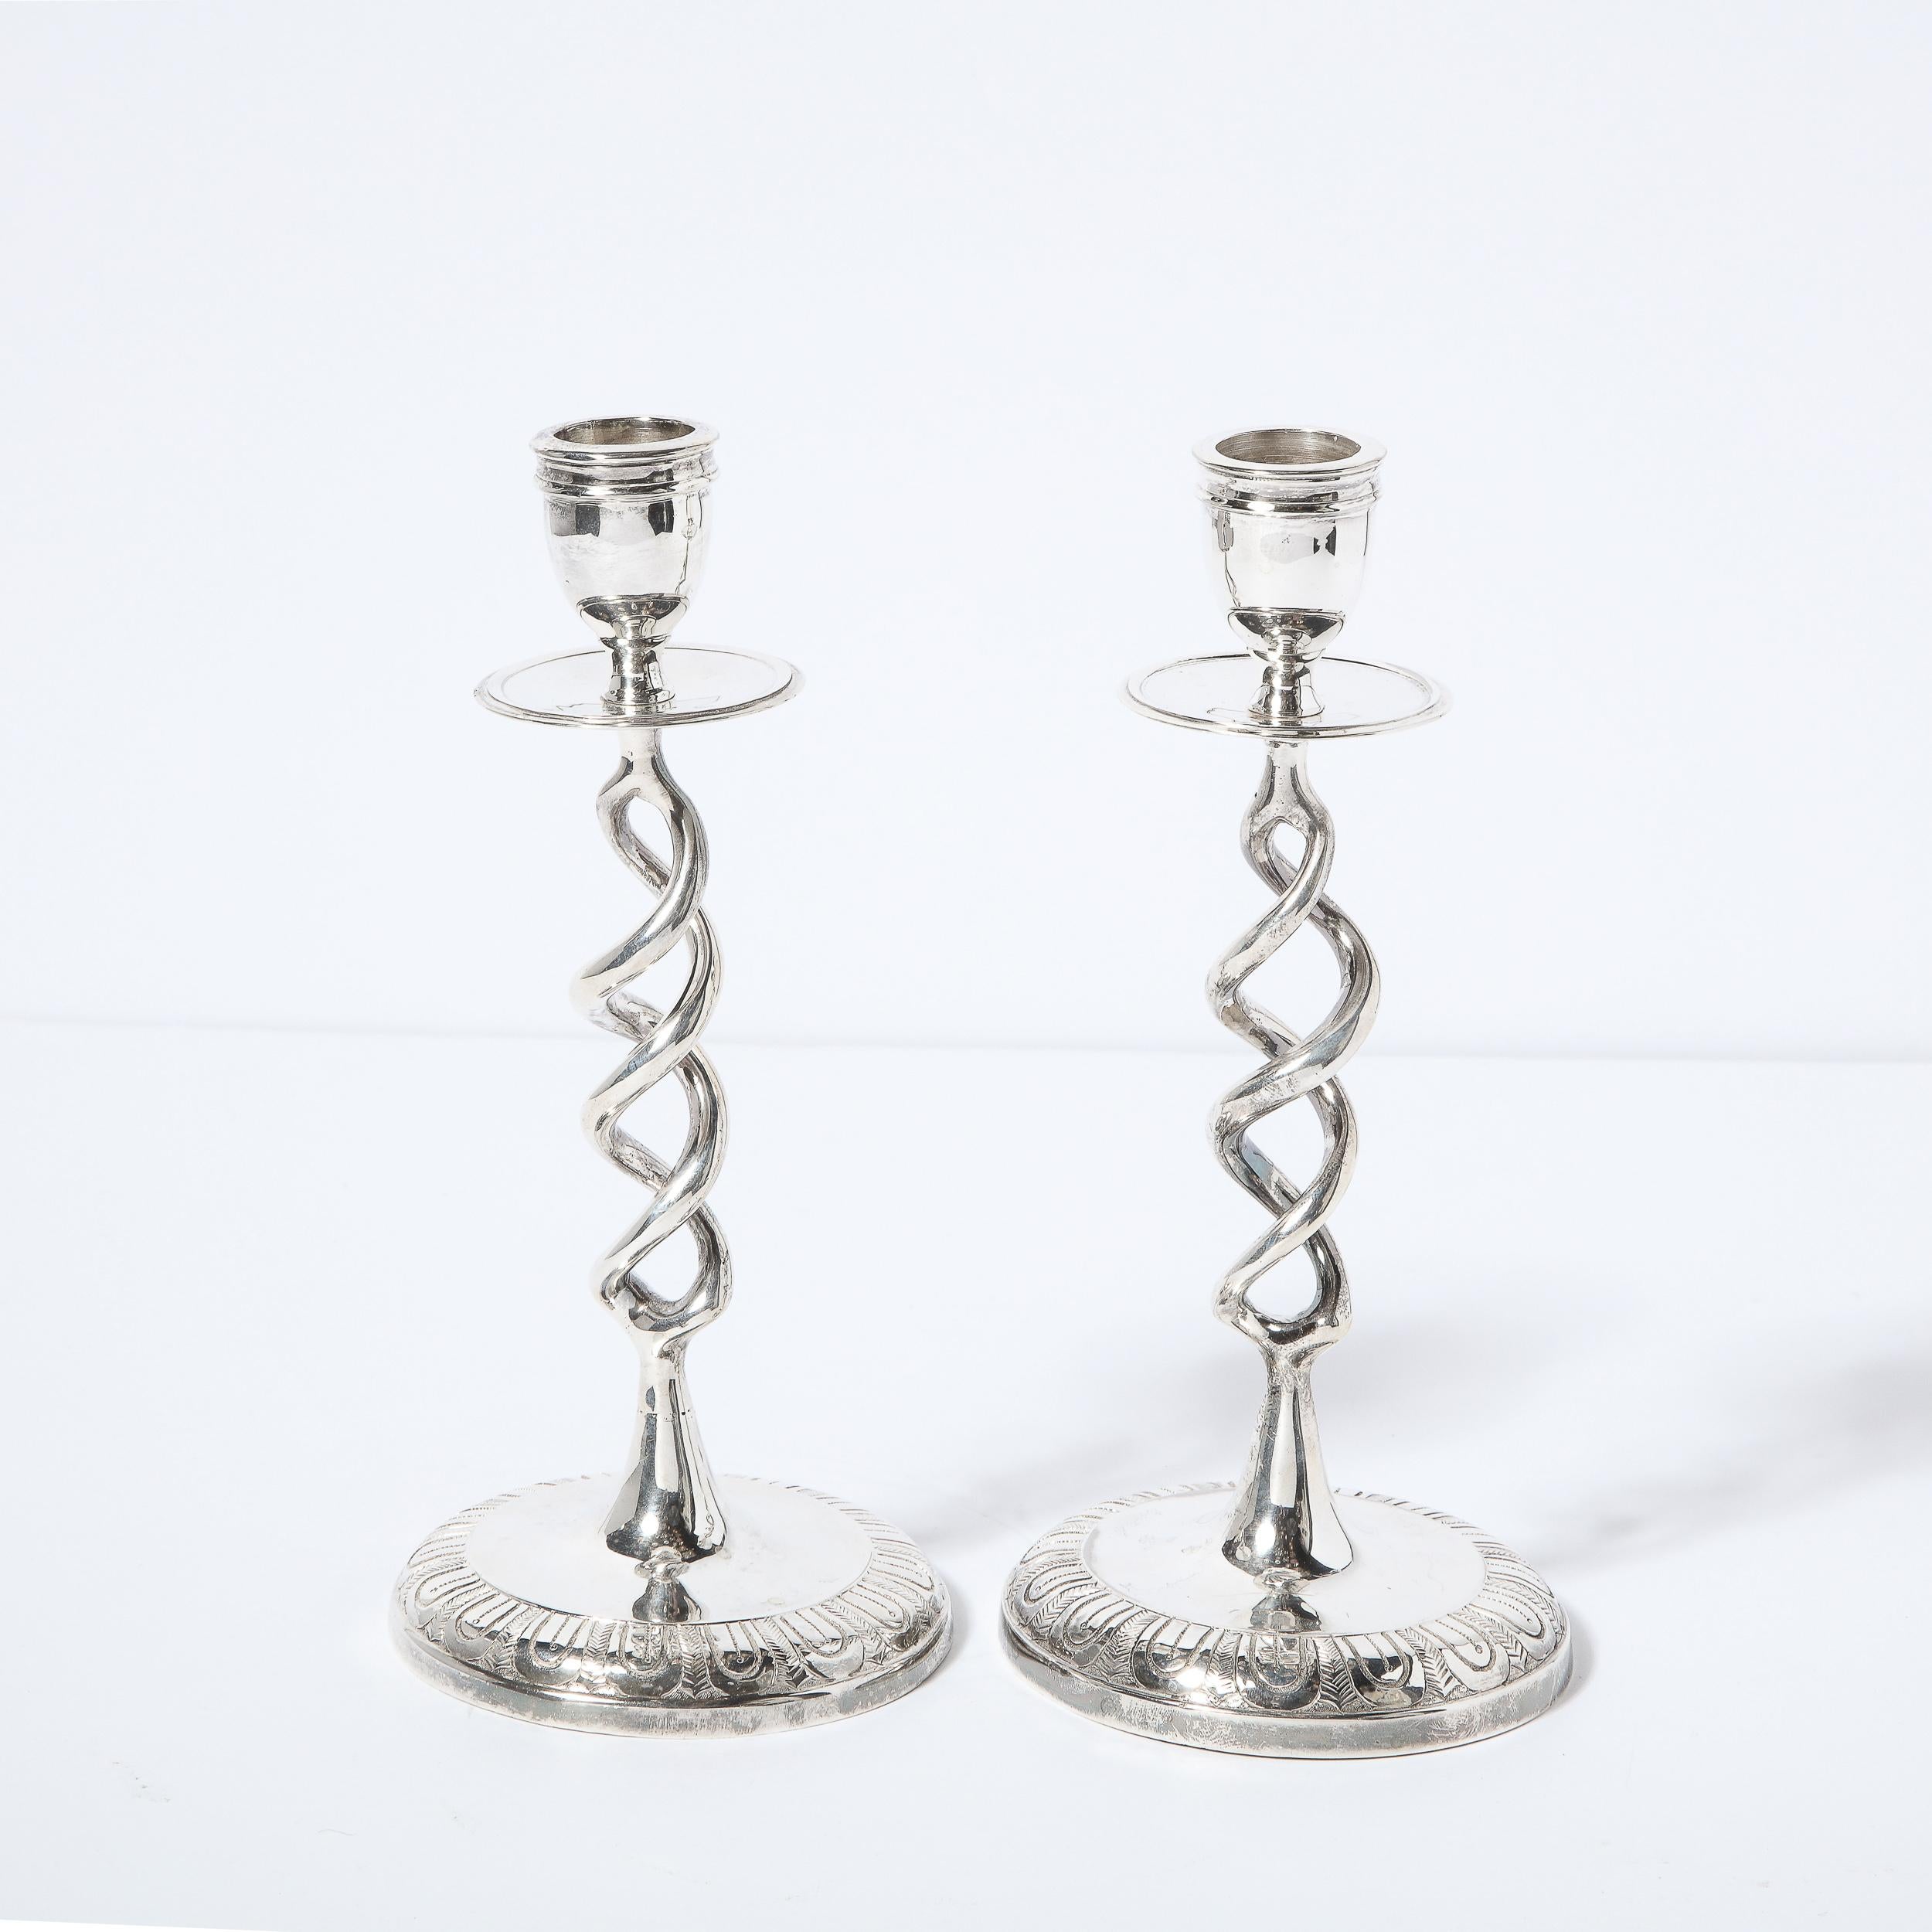 This elegant pair of Mid-Century Modern candle holders were realized in England circa 1960. They offer circular bases with hand etched geometric designs that ascend into a sculptural helix form body. The top features circular beveled bobeches and a